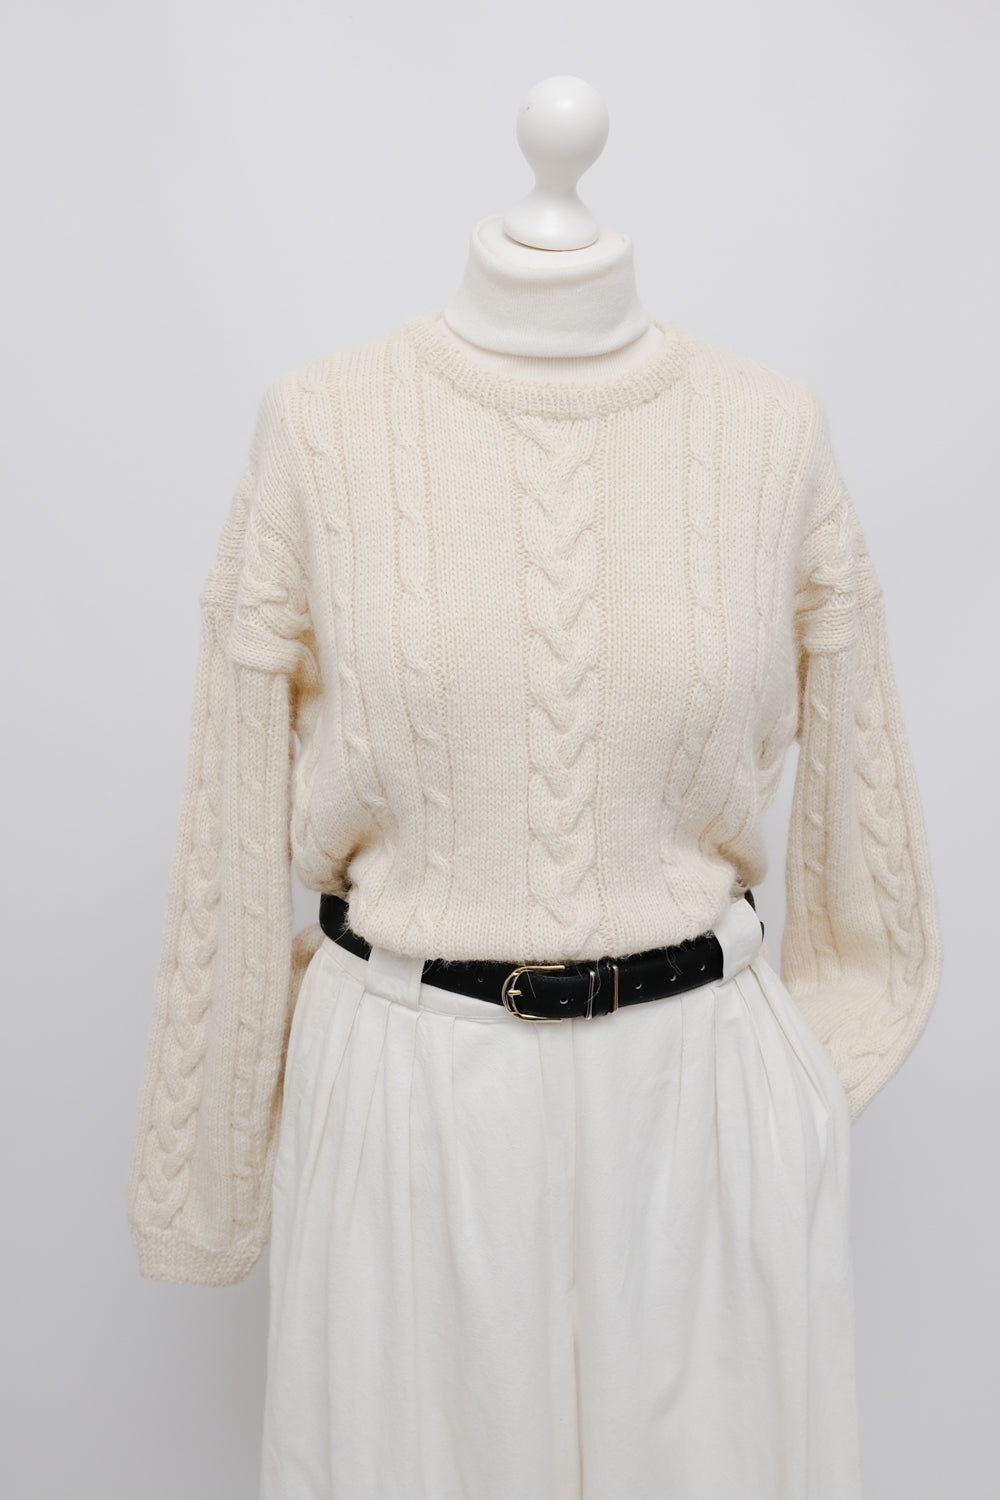 HANDMADE CABLE KNIT WOOL VINTAGE SWEATER